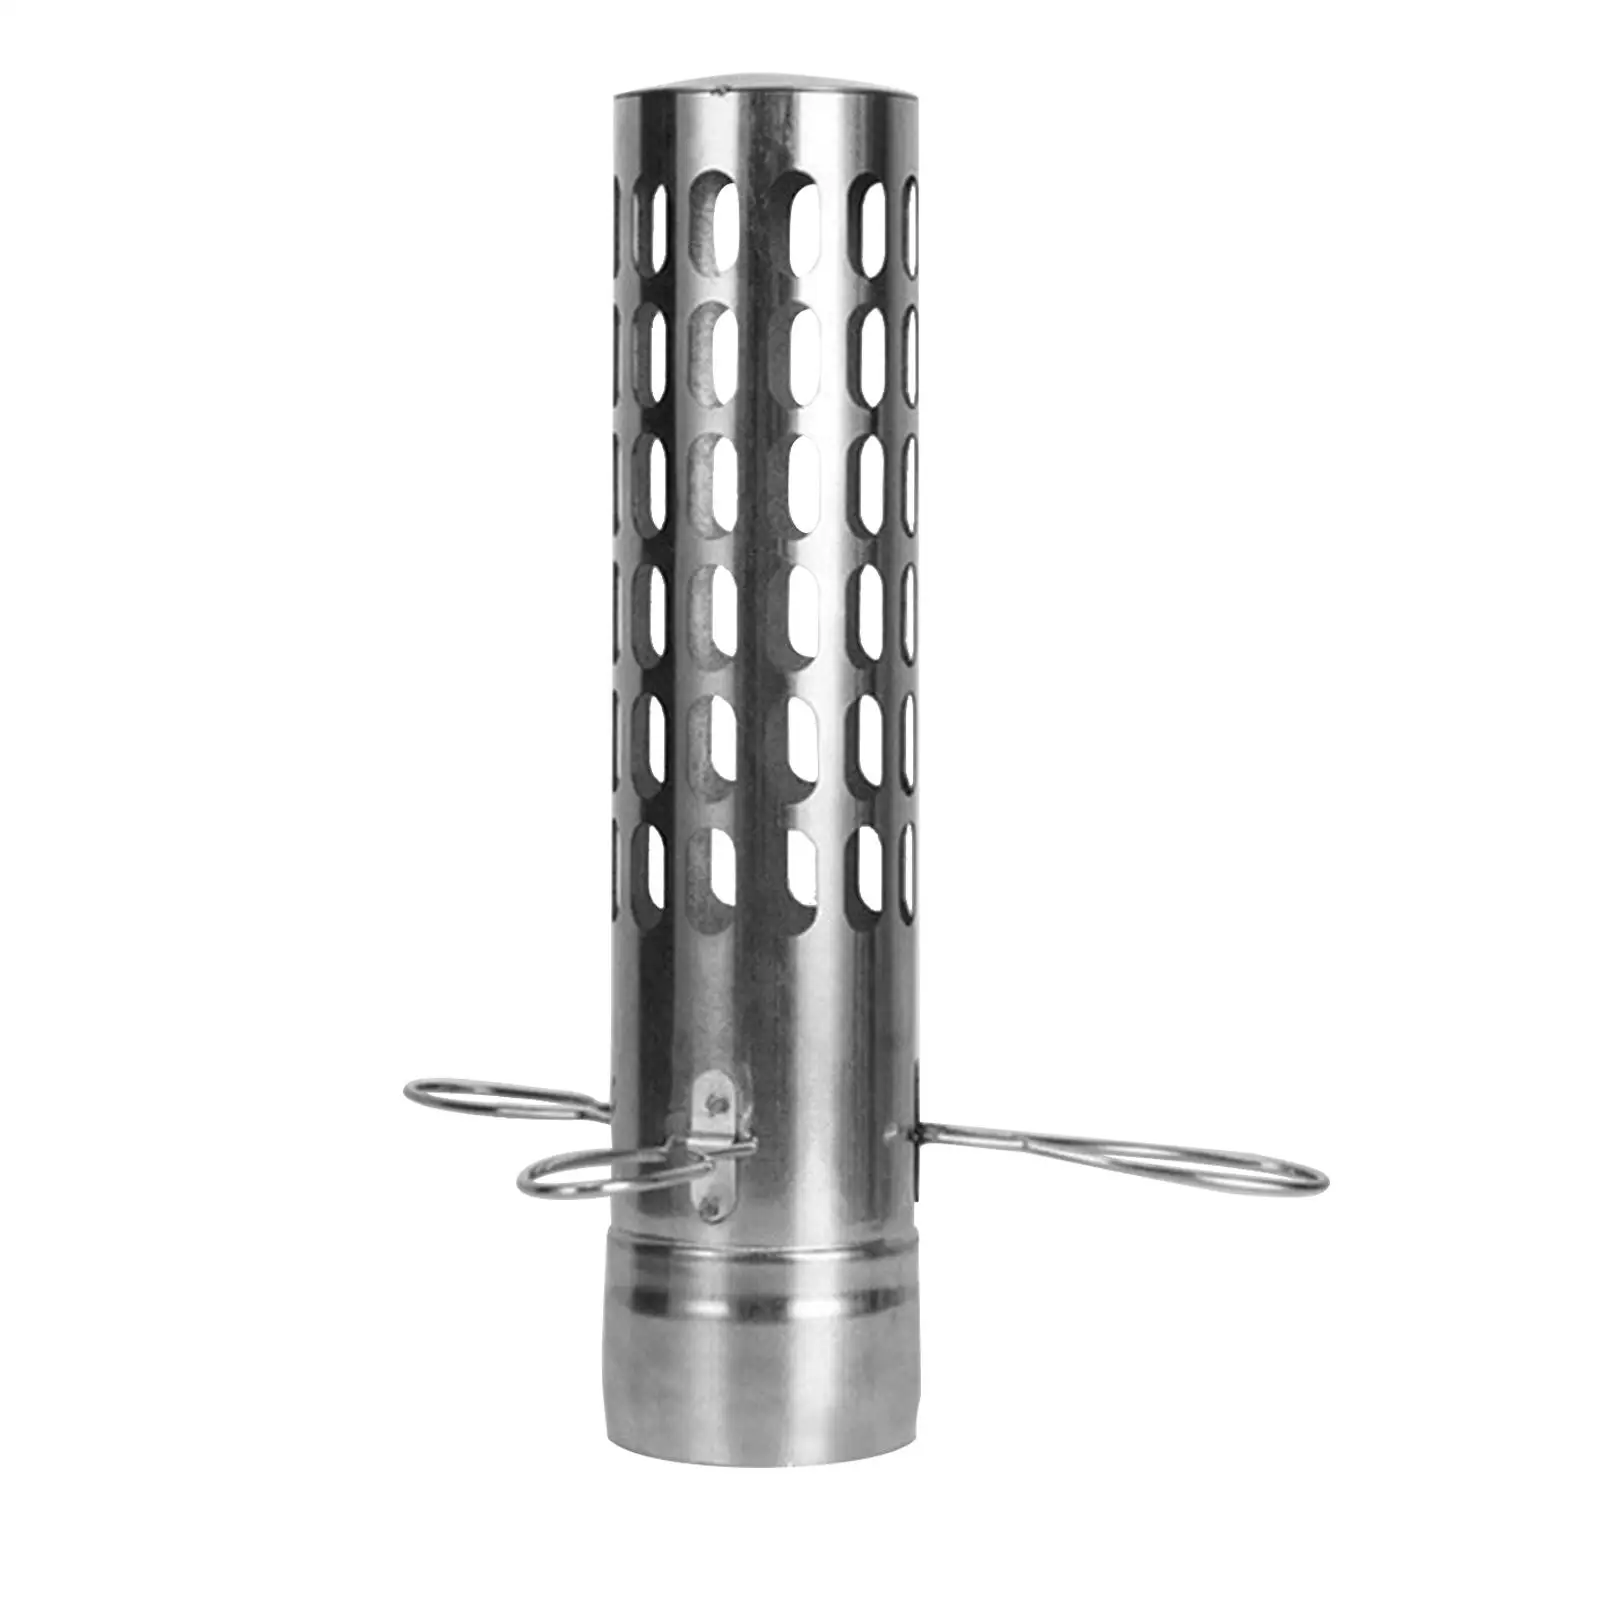 Durable Stove Chimney Accessories Cooking Camping Flue Fire Place